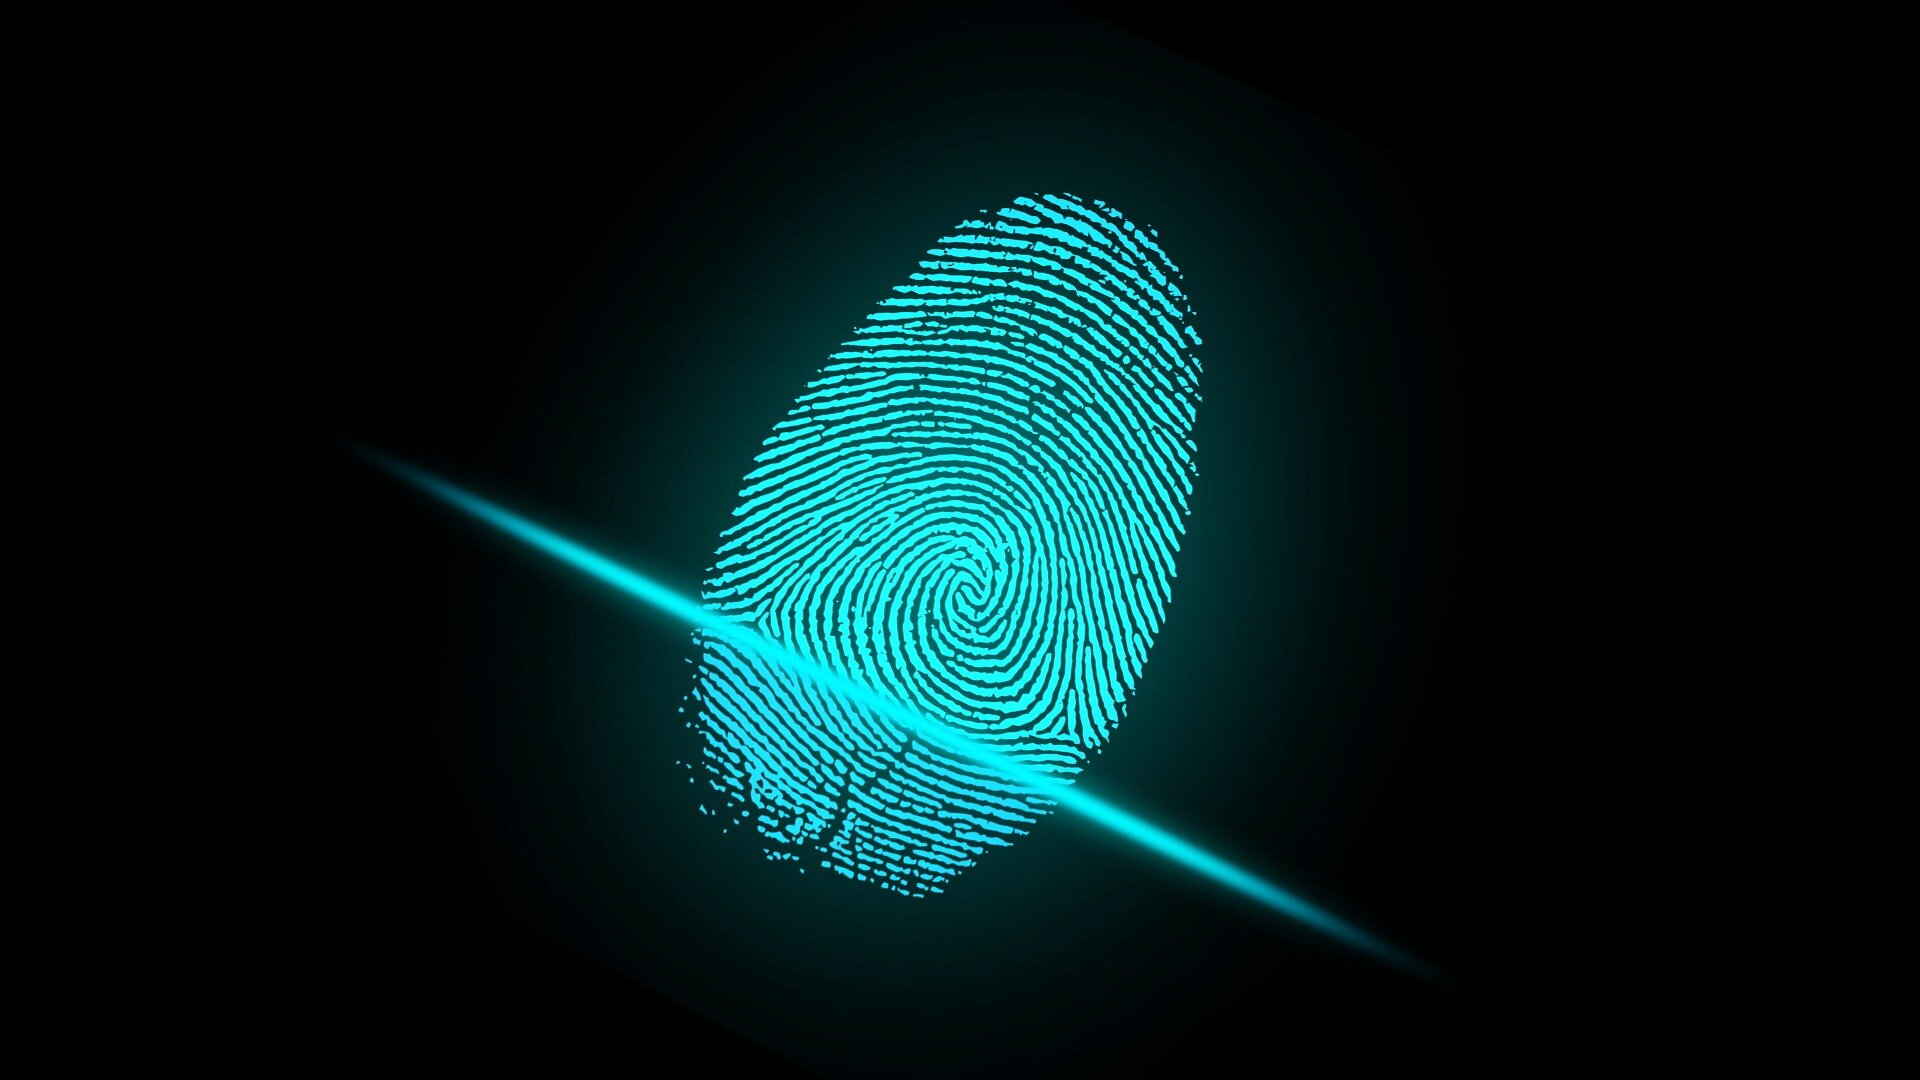 #Security vulnerabilities revealed in fingerprint sensors and crypto wallets